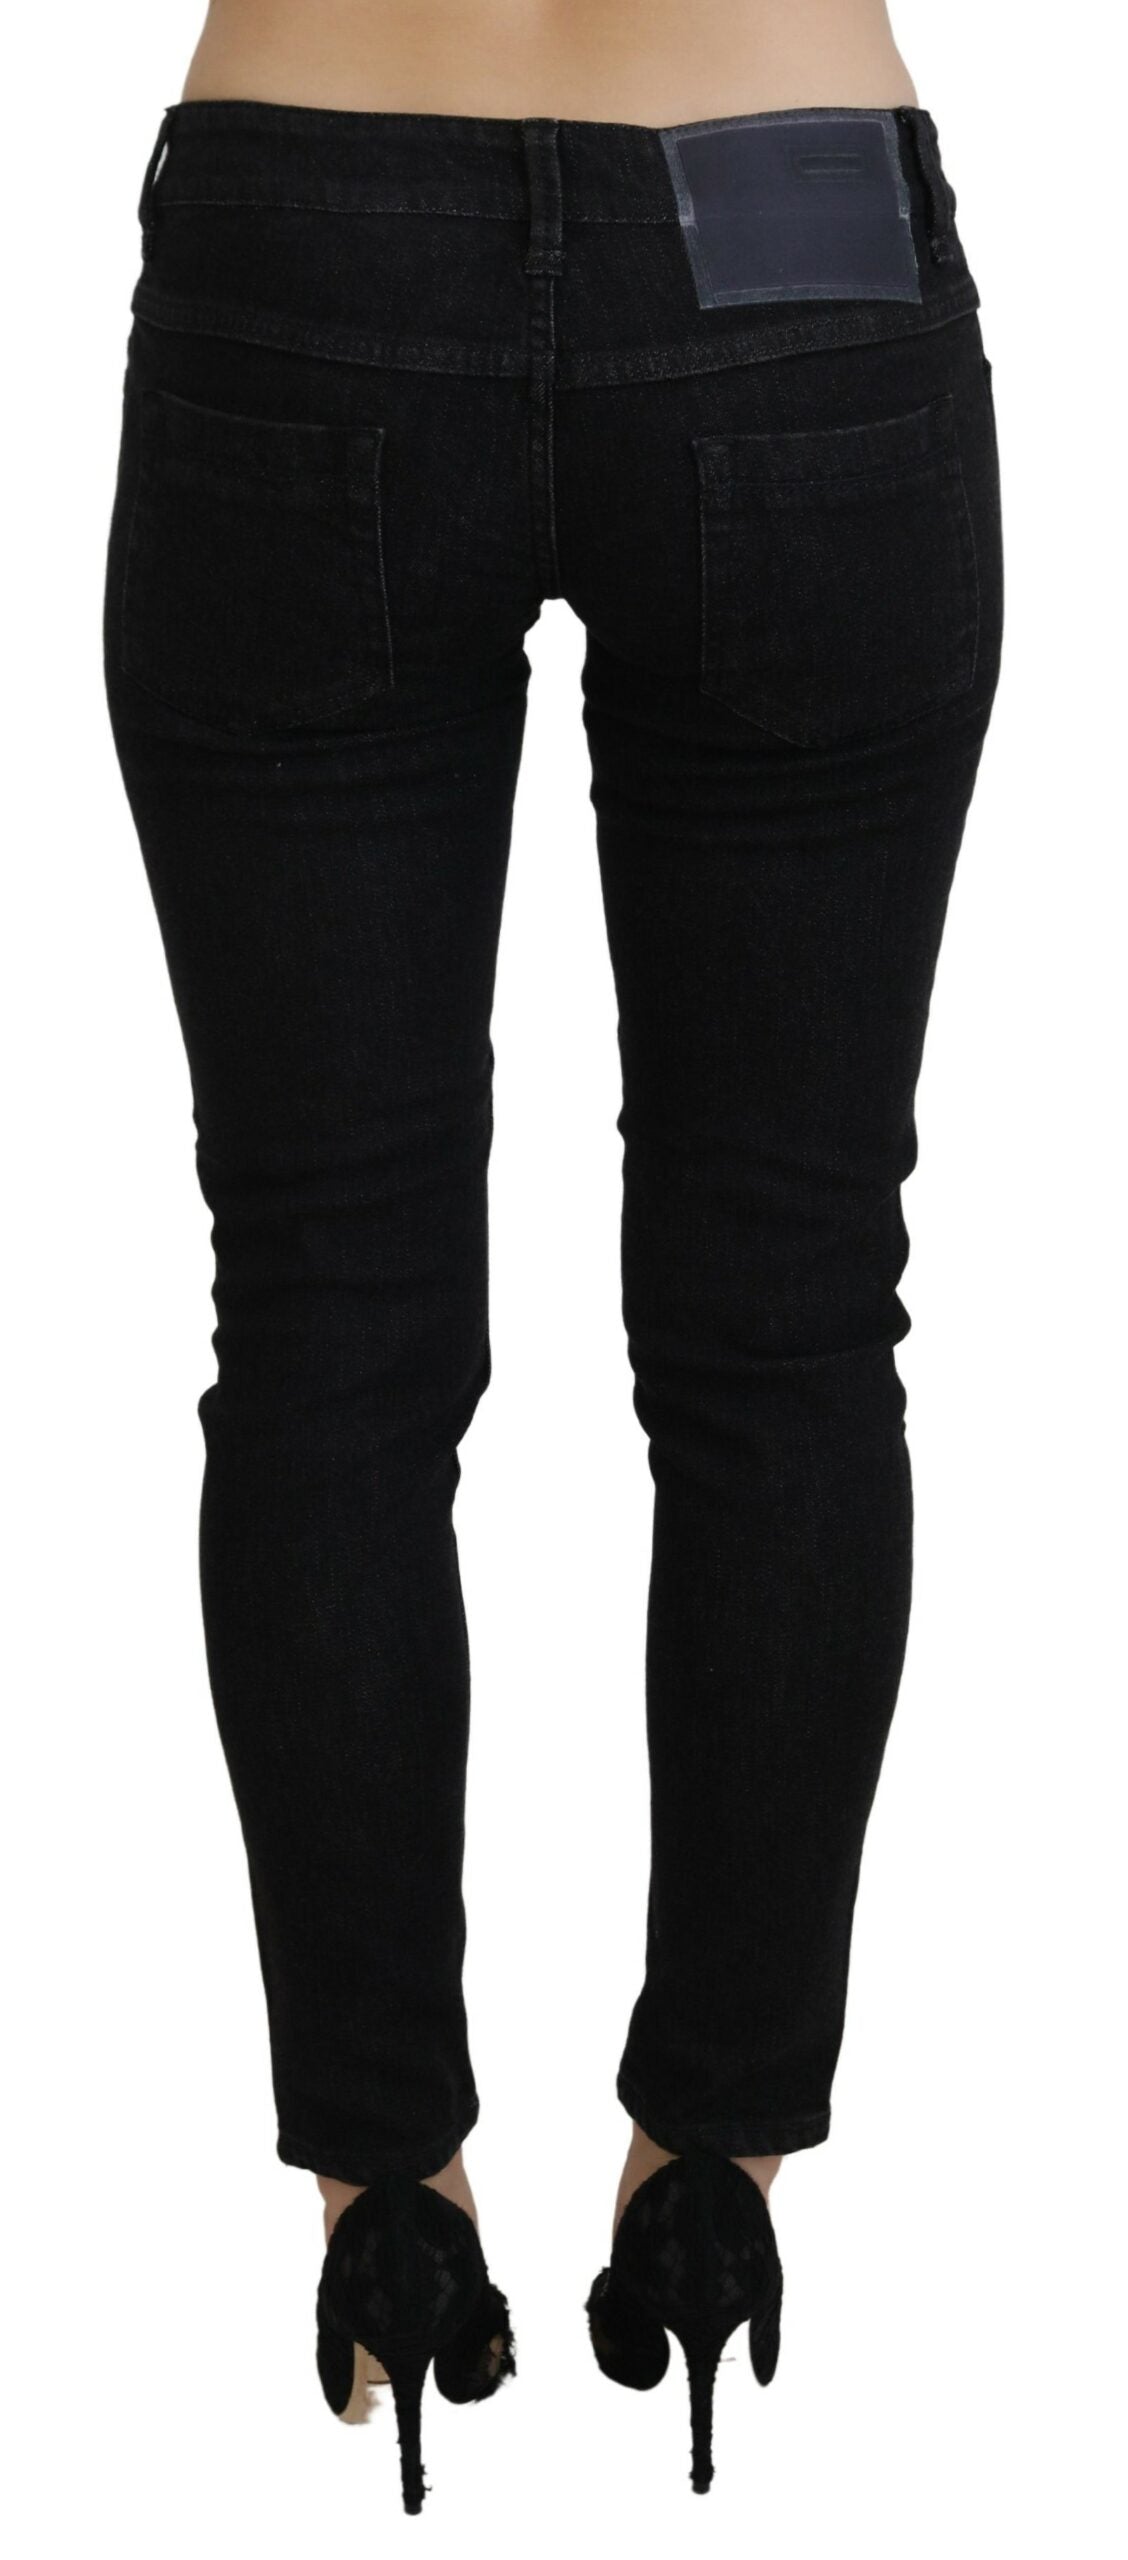 Black Low Waist Slim Fit Cotton Denim Jeans - Designed by Acht Available to Buy at a Discounted Price on Moon Behind The Hill Online Designer Discount Store